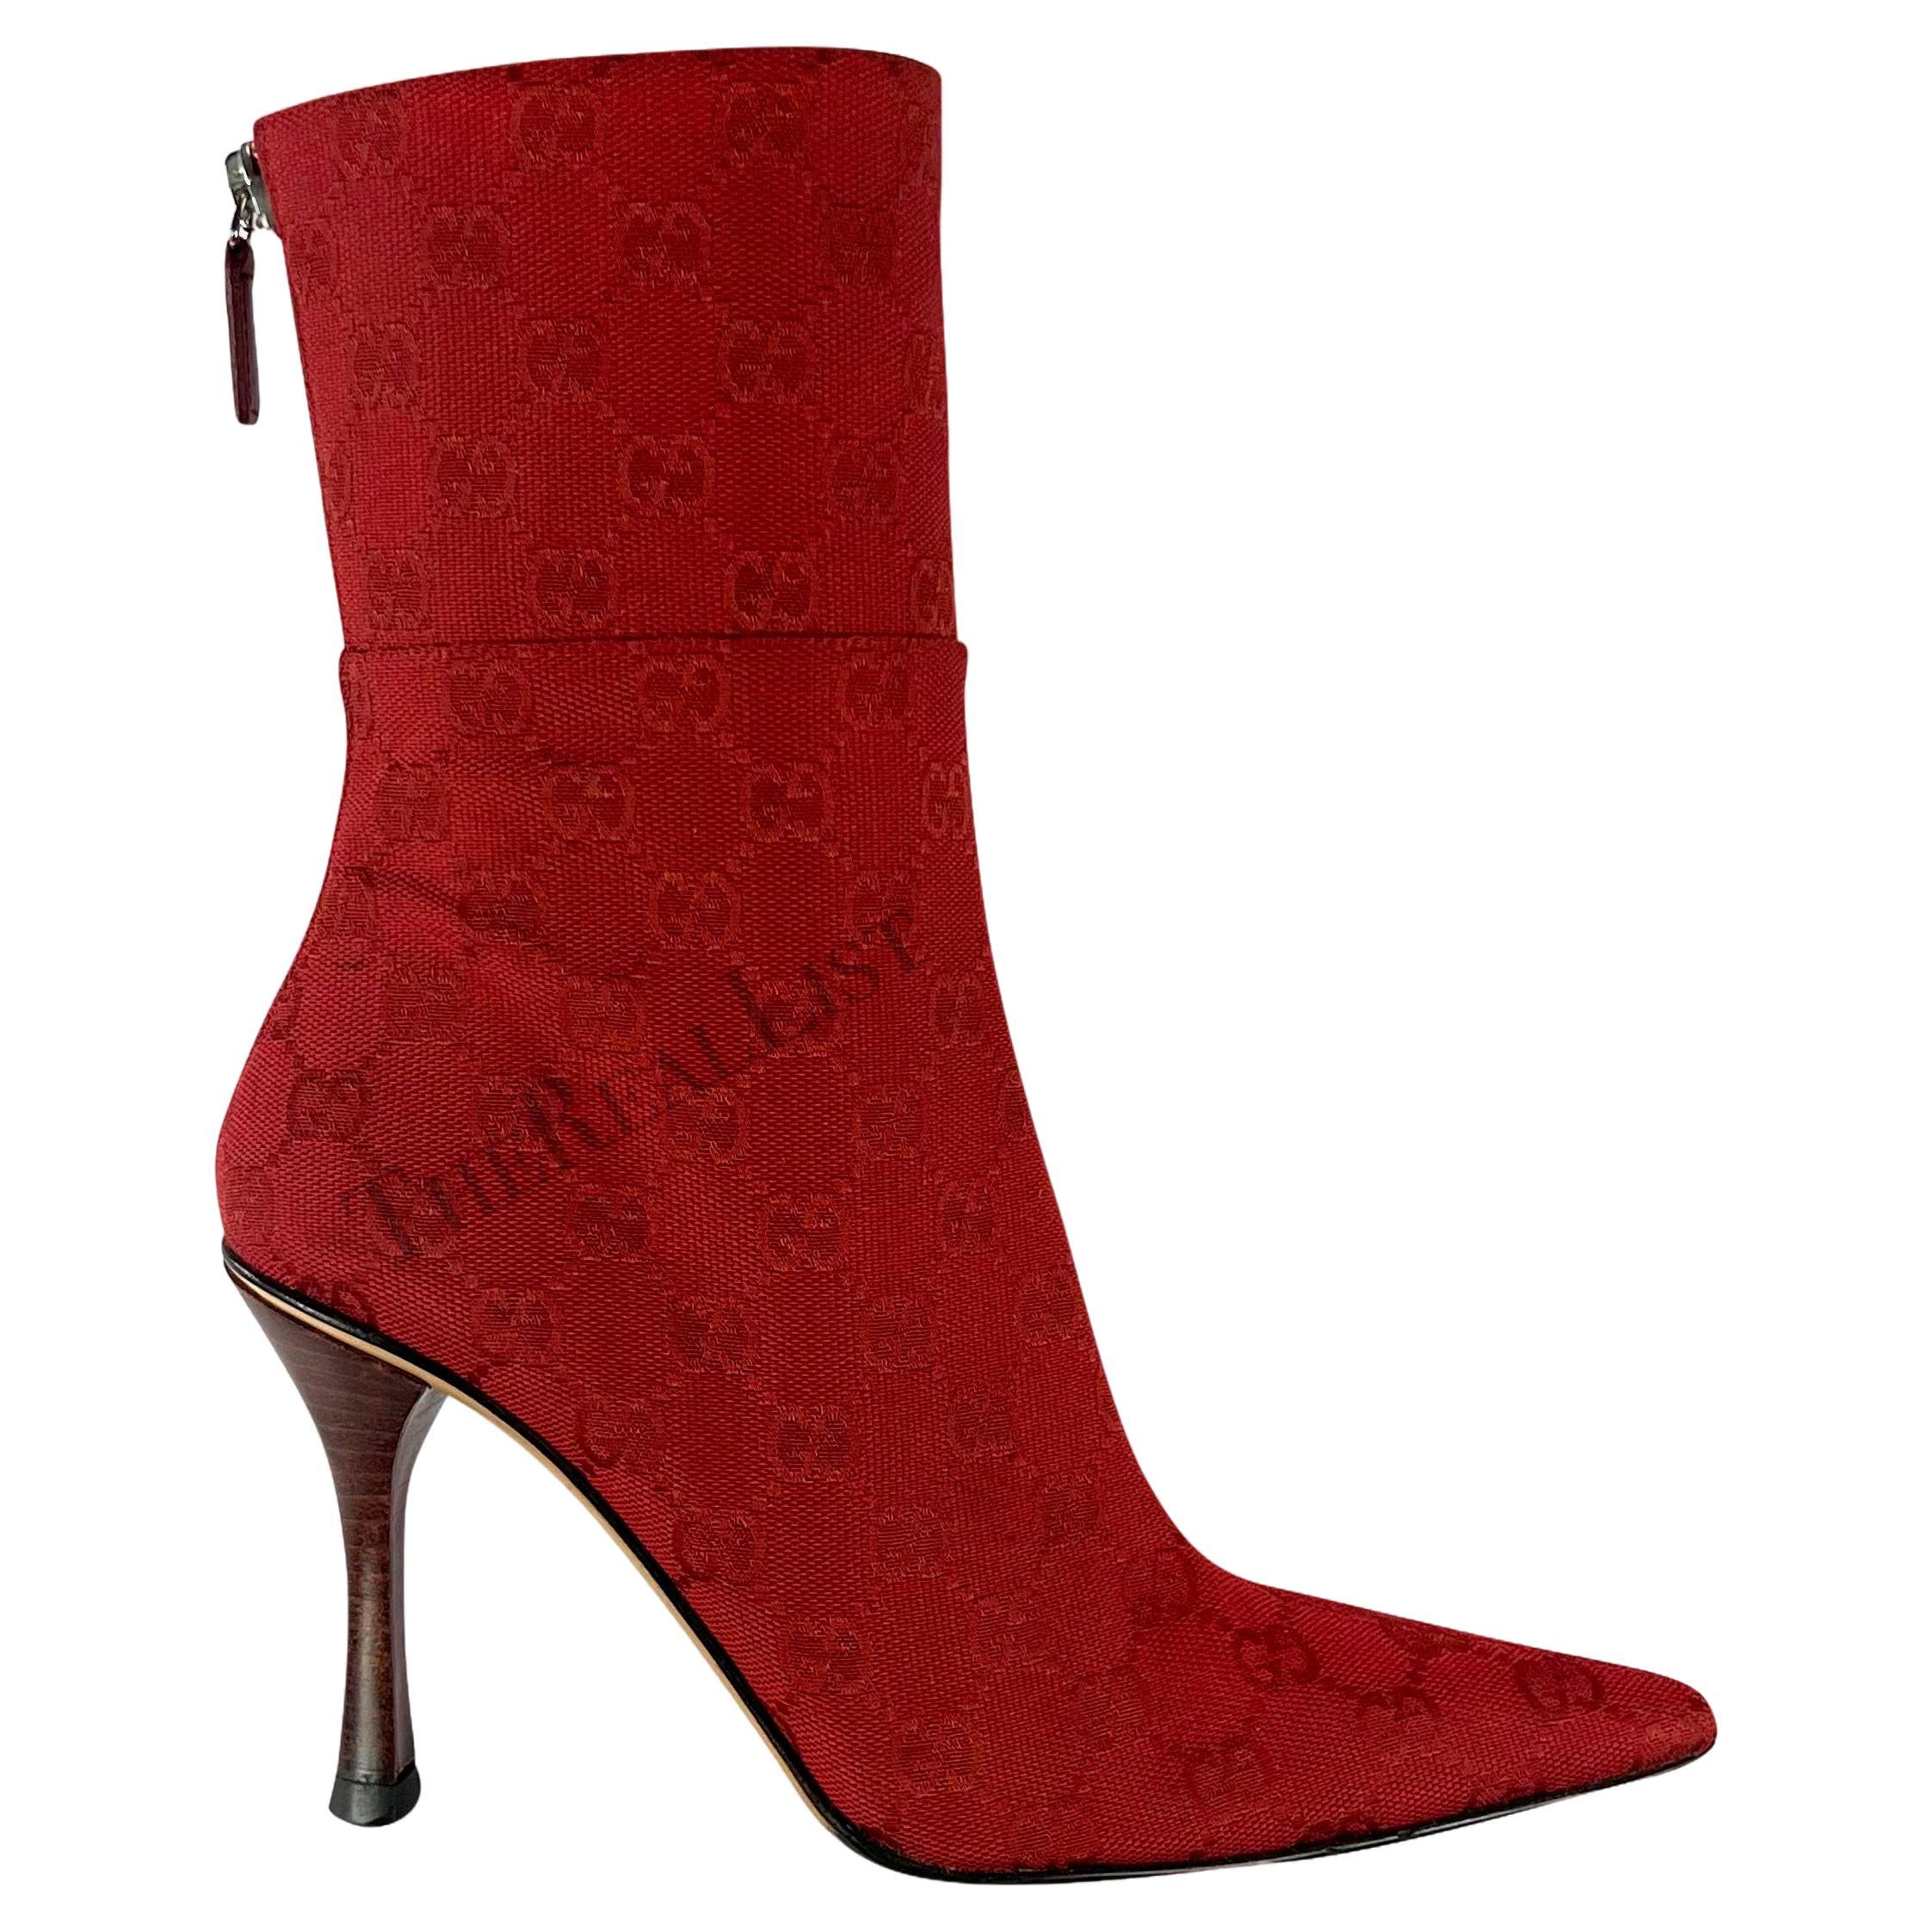 Early 2000s Gucci by Tom Ford Red 'GG' Canvas Heel Ankle Boots Size 6B For Sale